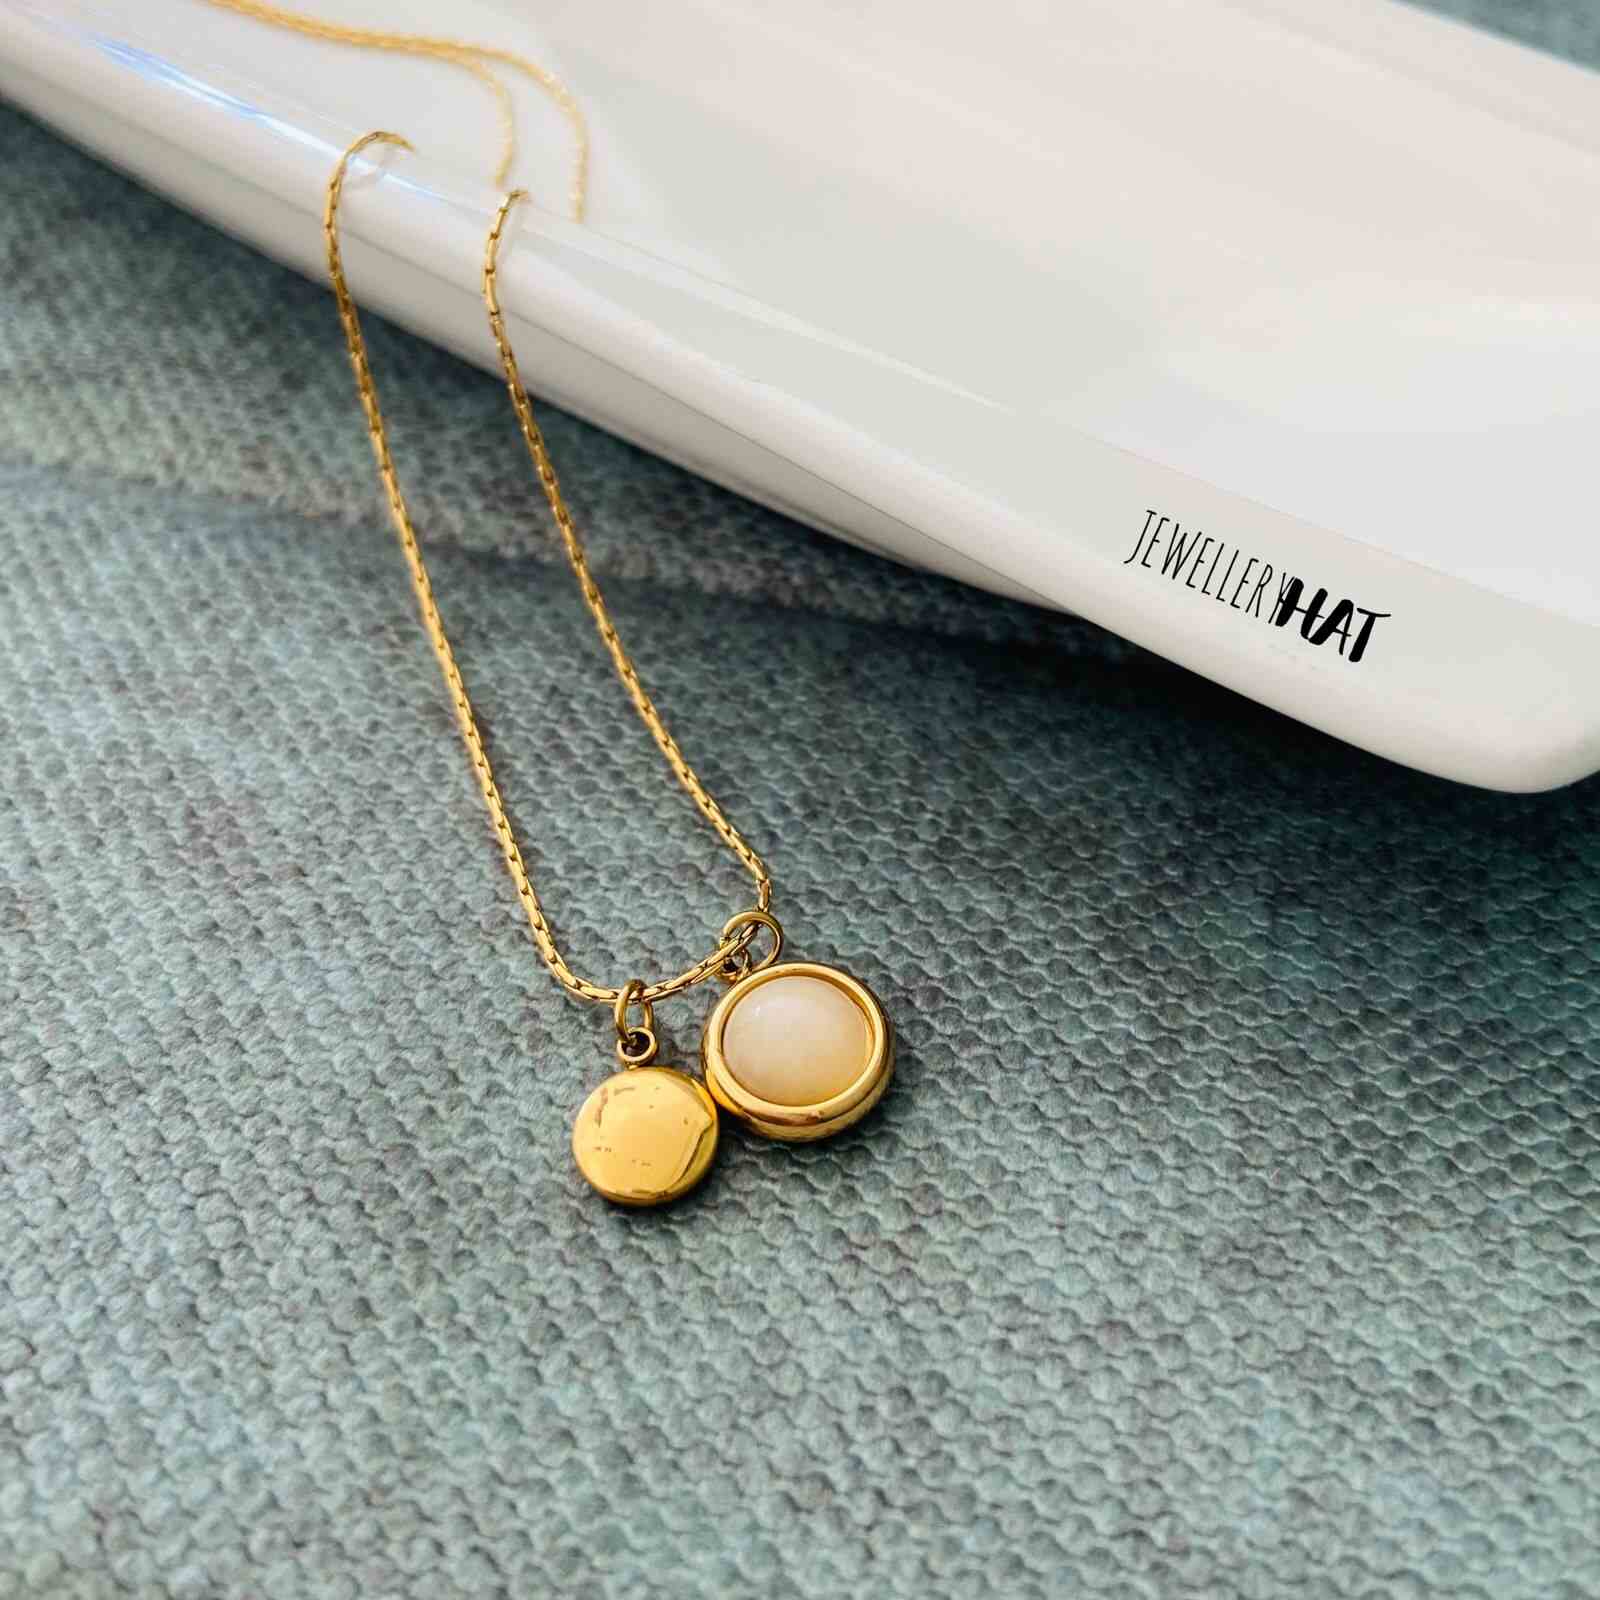 Round Pendant | 18 kt Gold Plated | Fashion Jewellery for Women